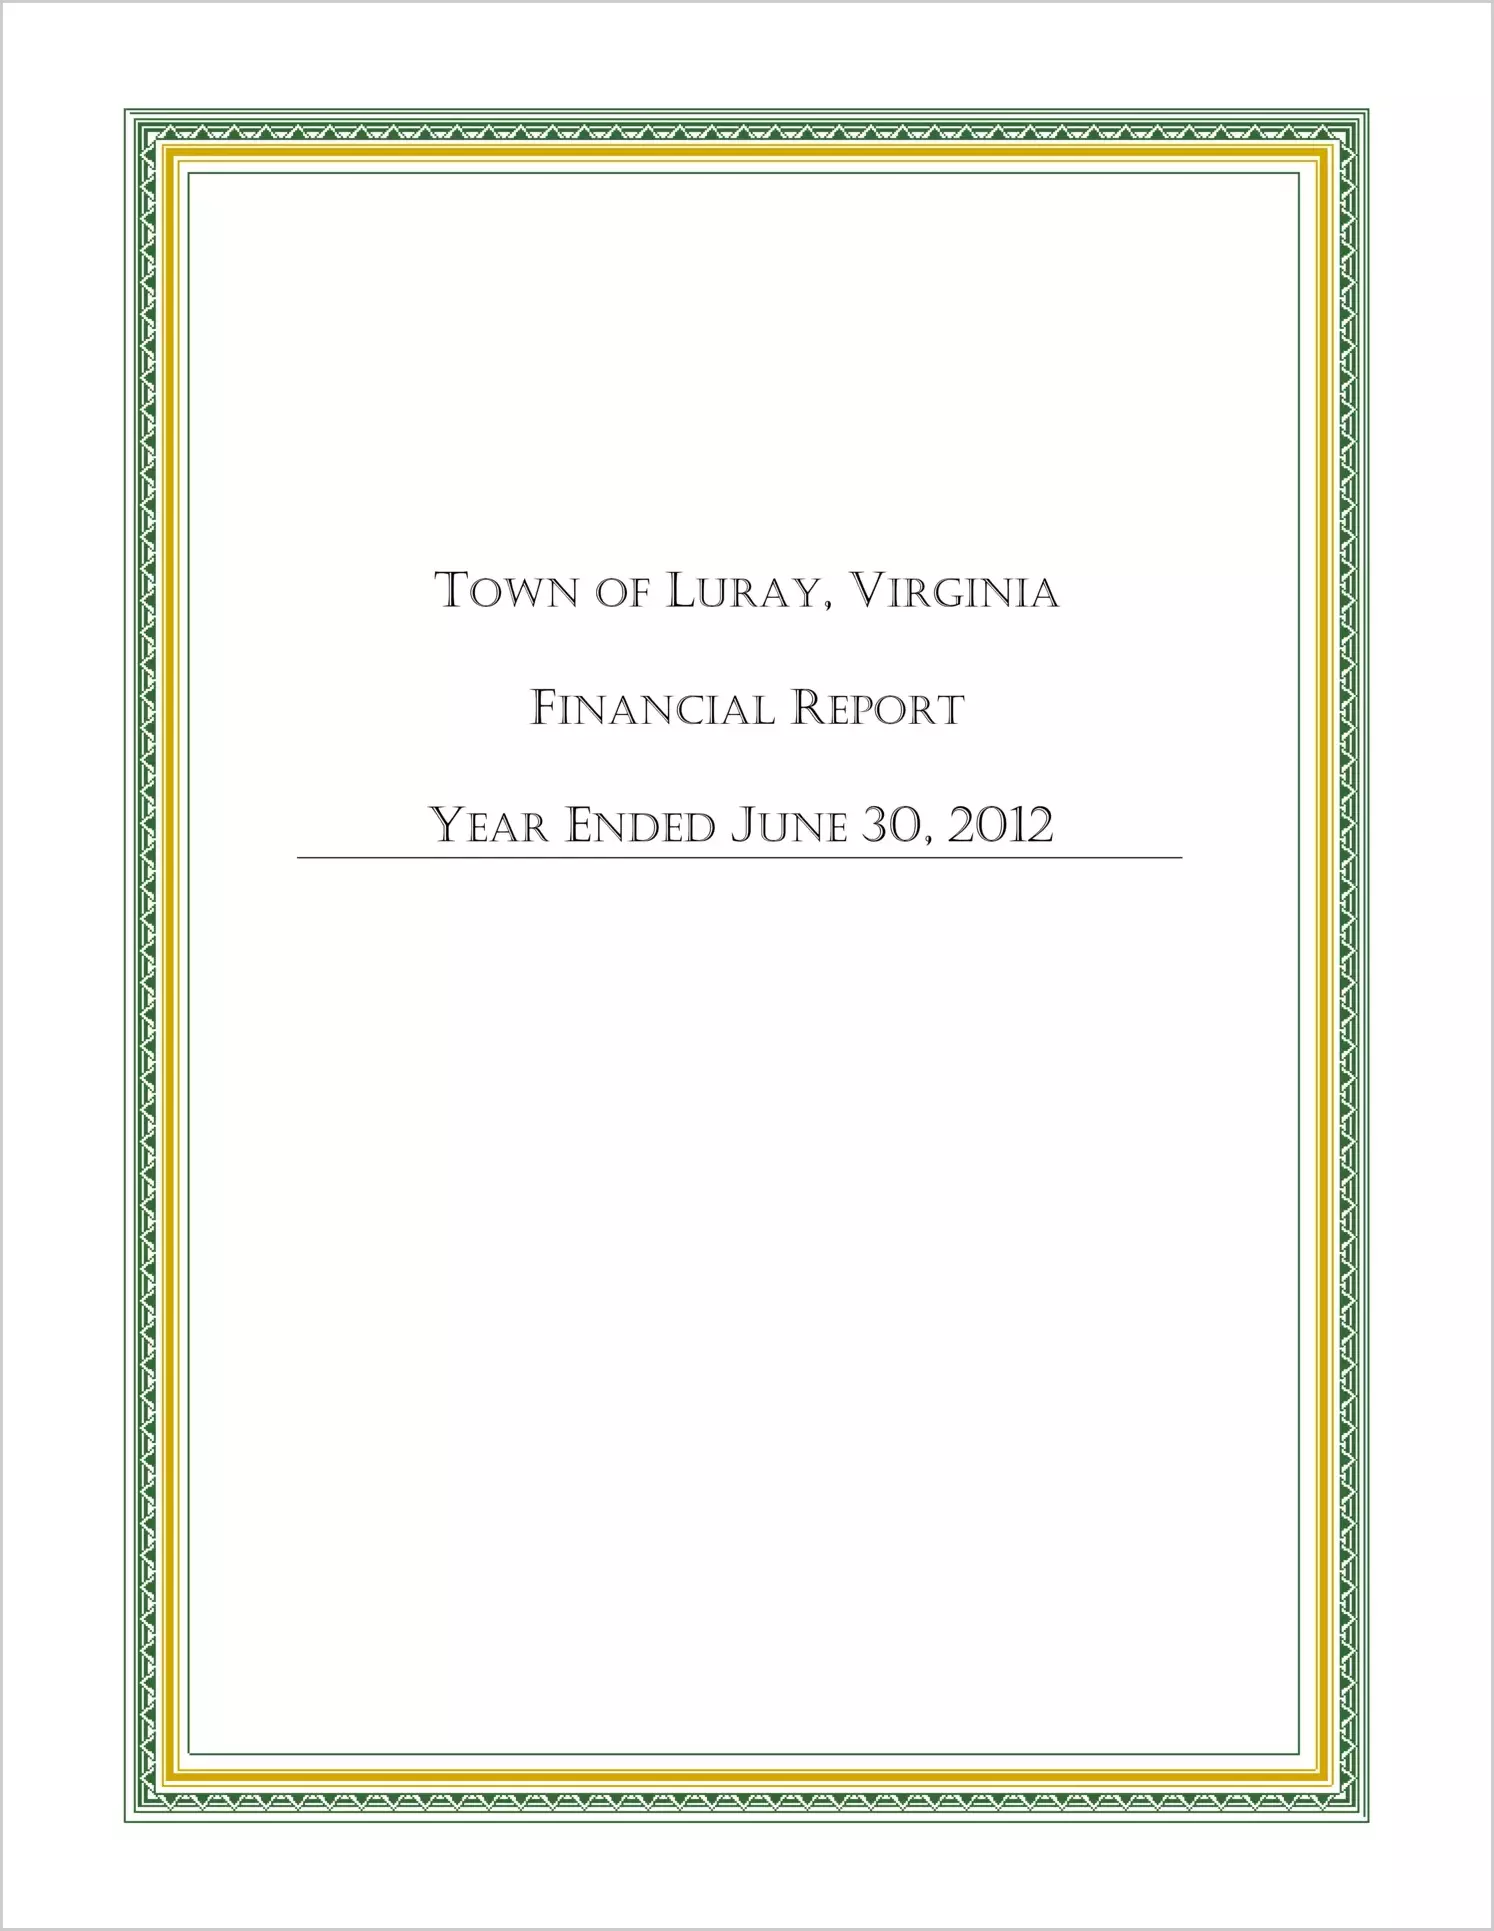 2012 Annual Financial Report for Town of Luray